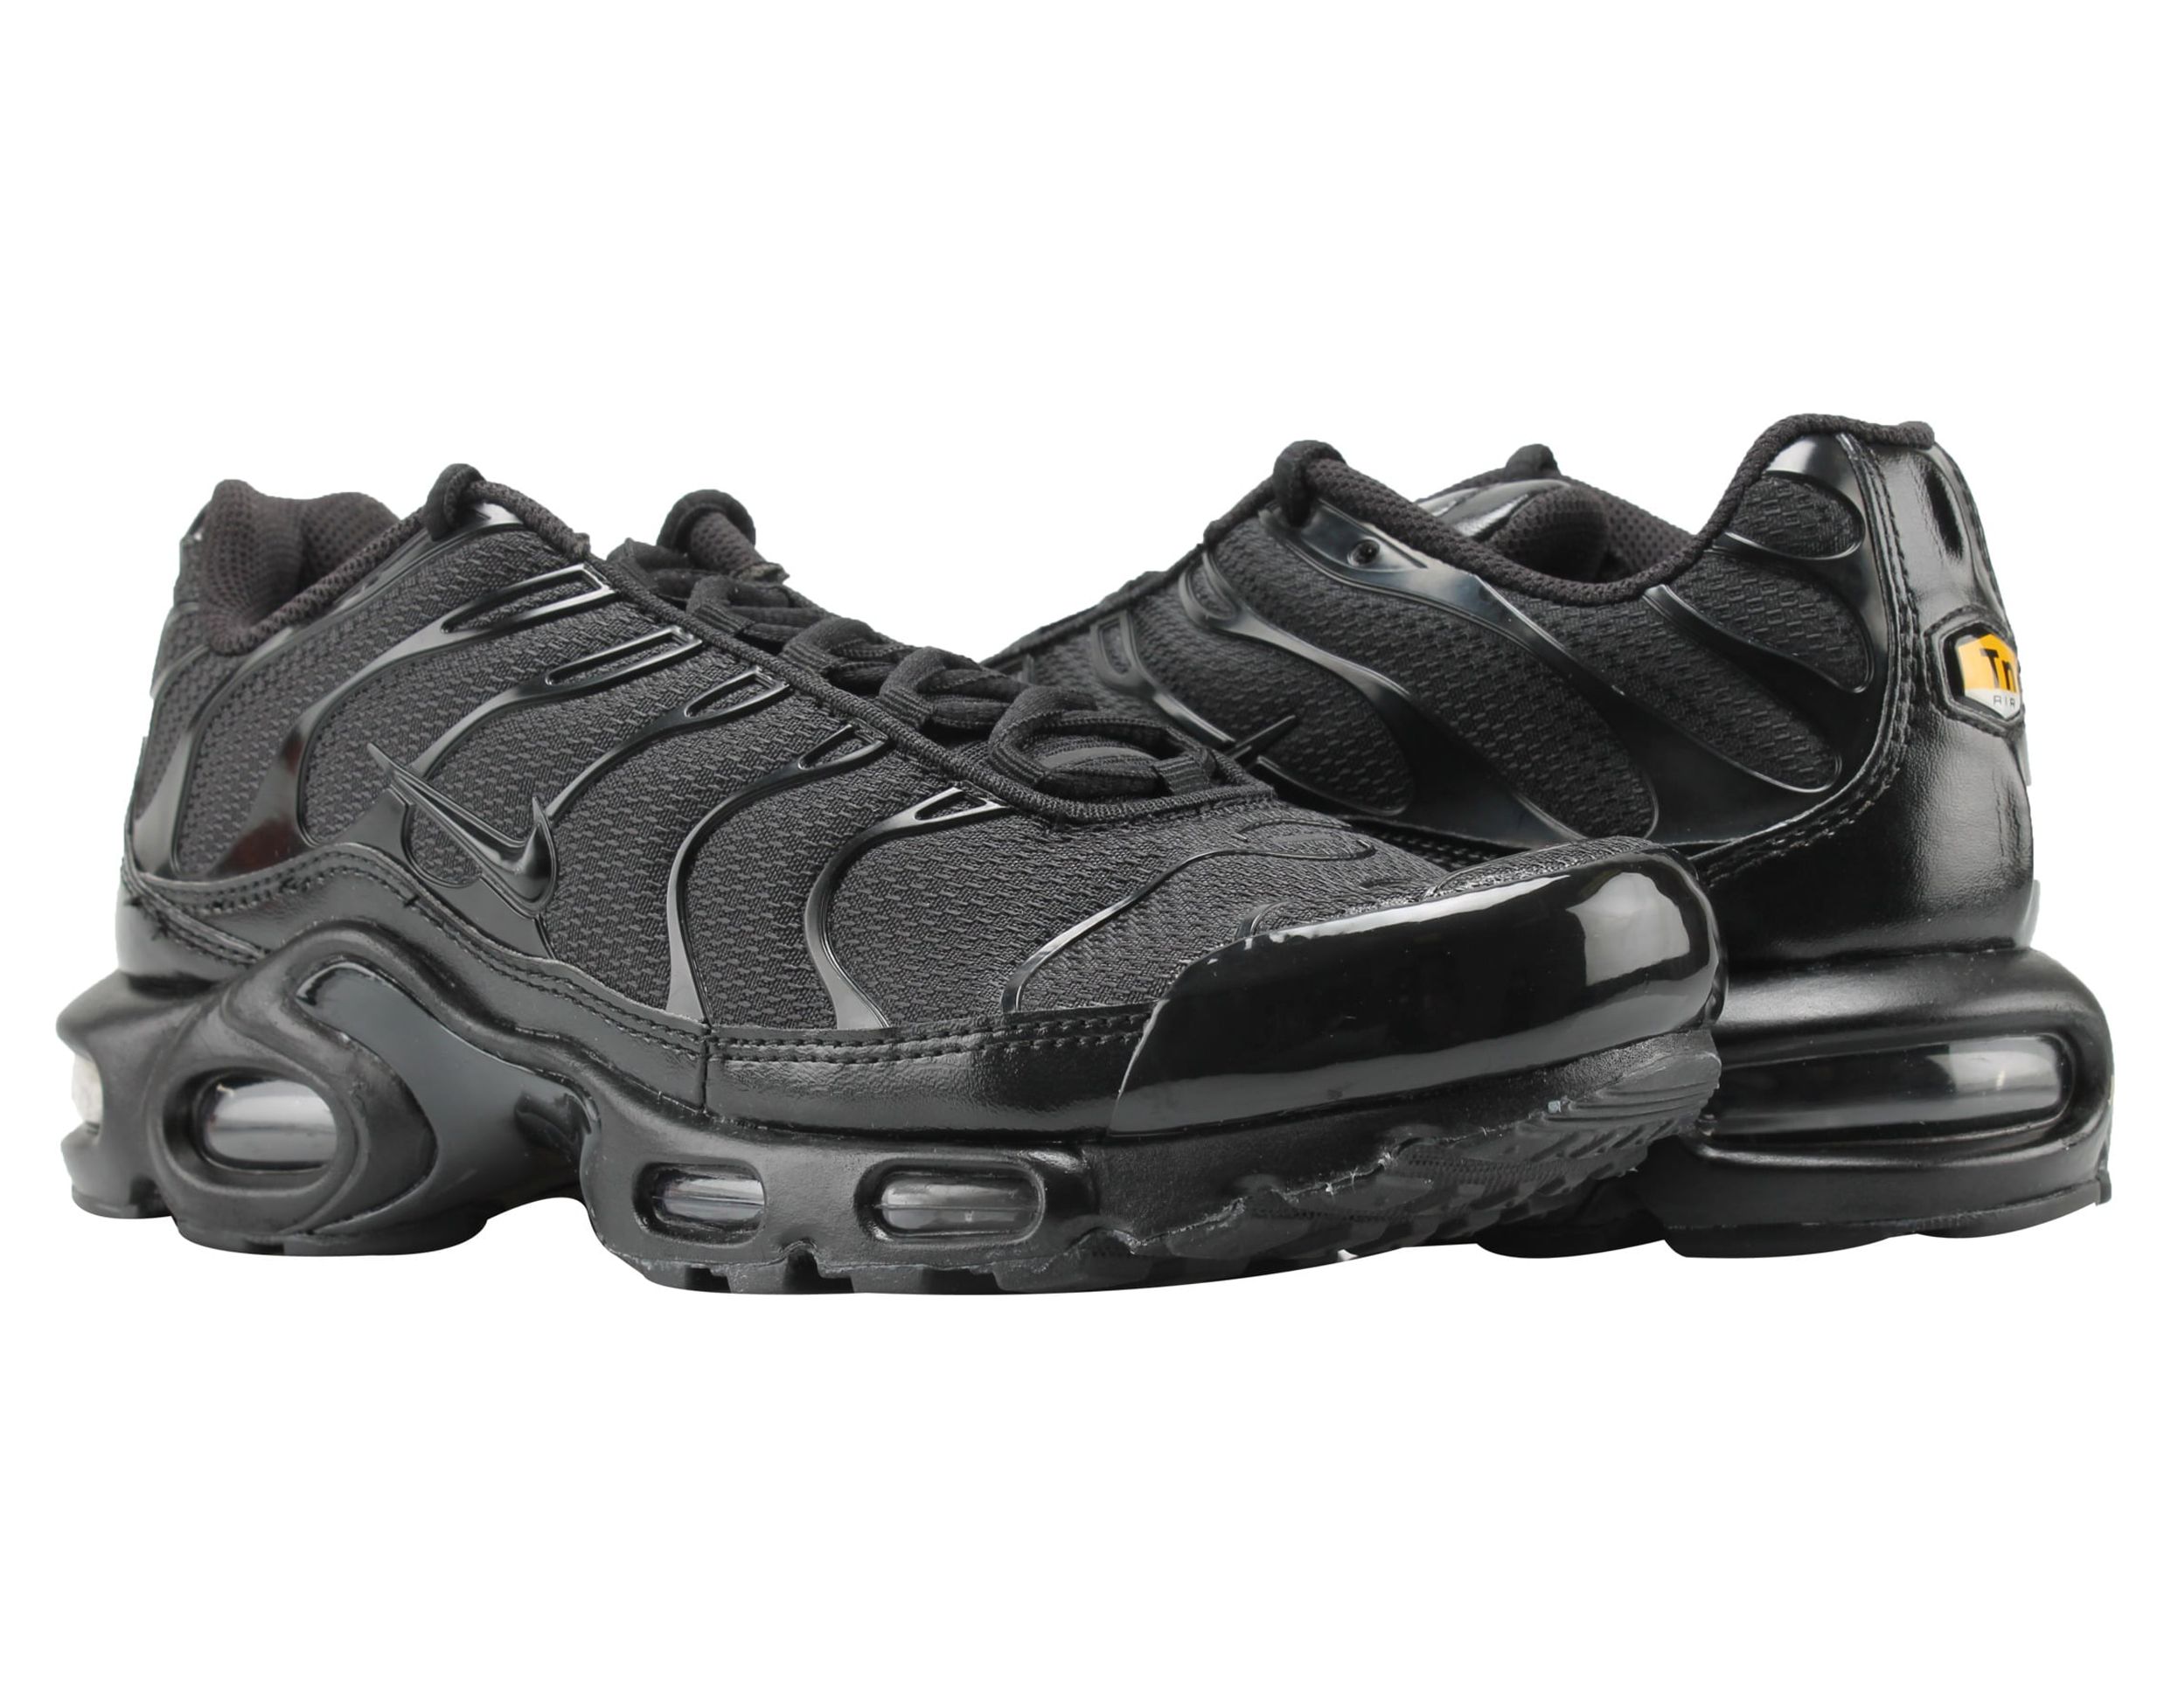 Nike Men's Air Max Plus Tuned 1 Fabric Trainer Shoes - image 1 of 6